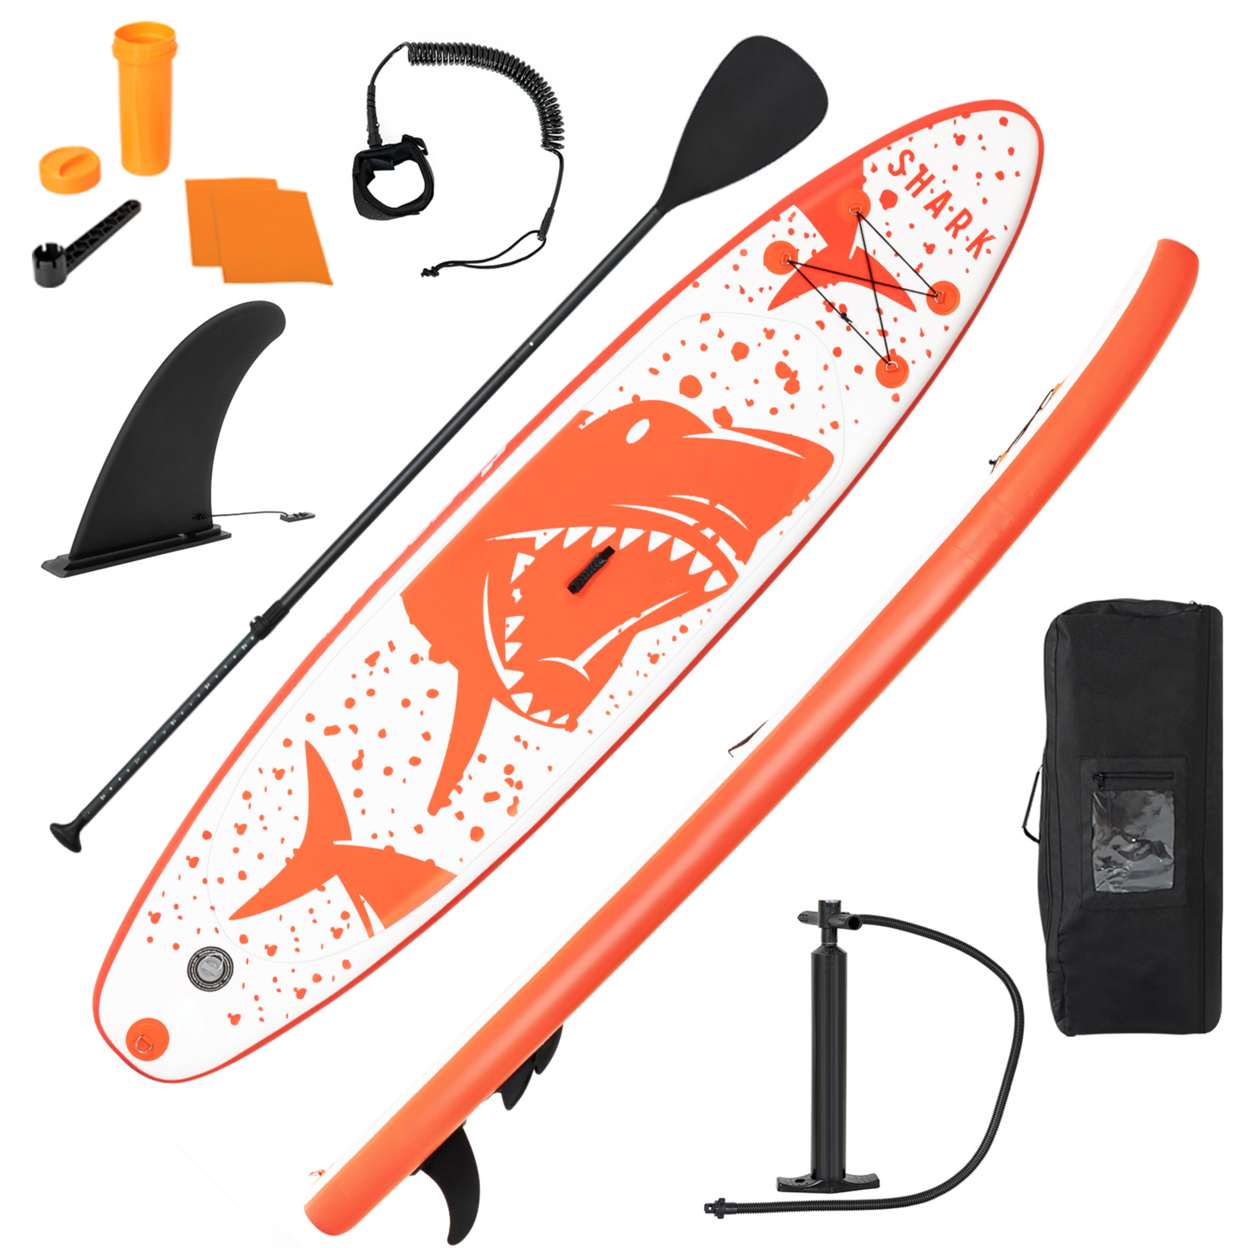 11' Inflatable Stand-Up Paddle Board Non-Slip Deck Surfboard W/ Hand Pump